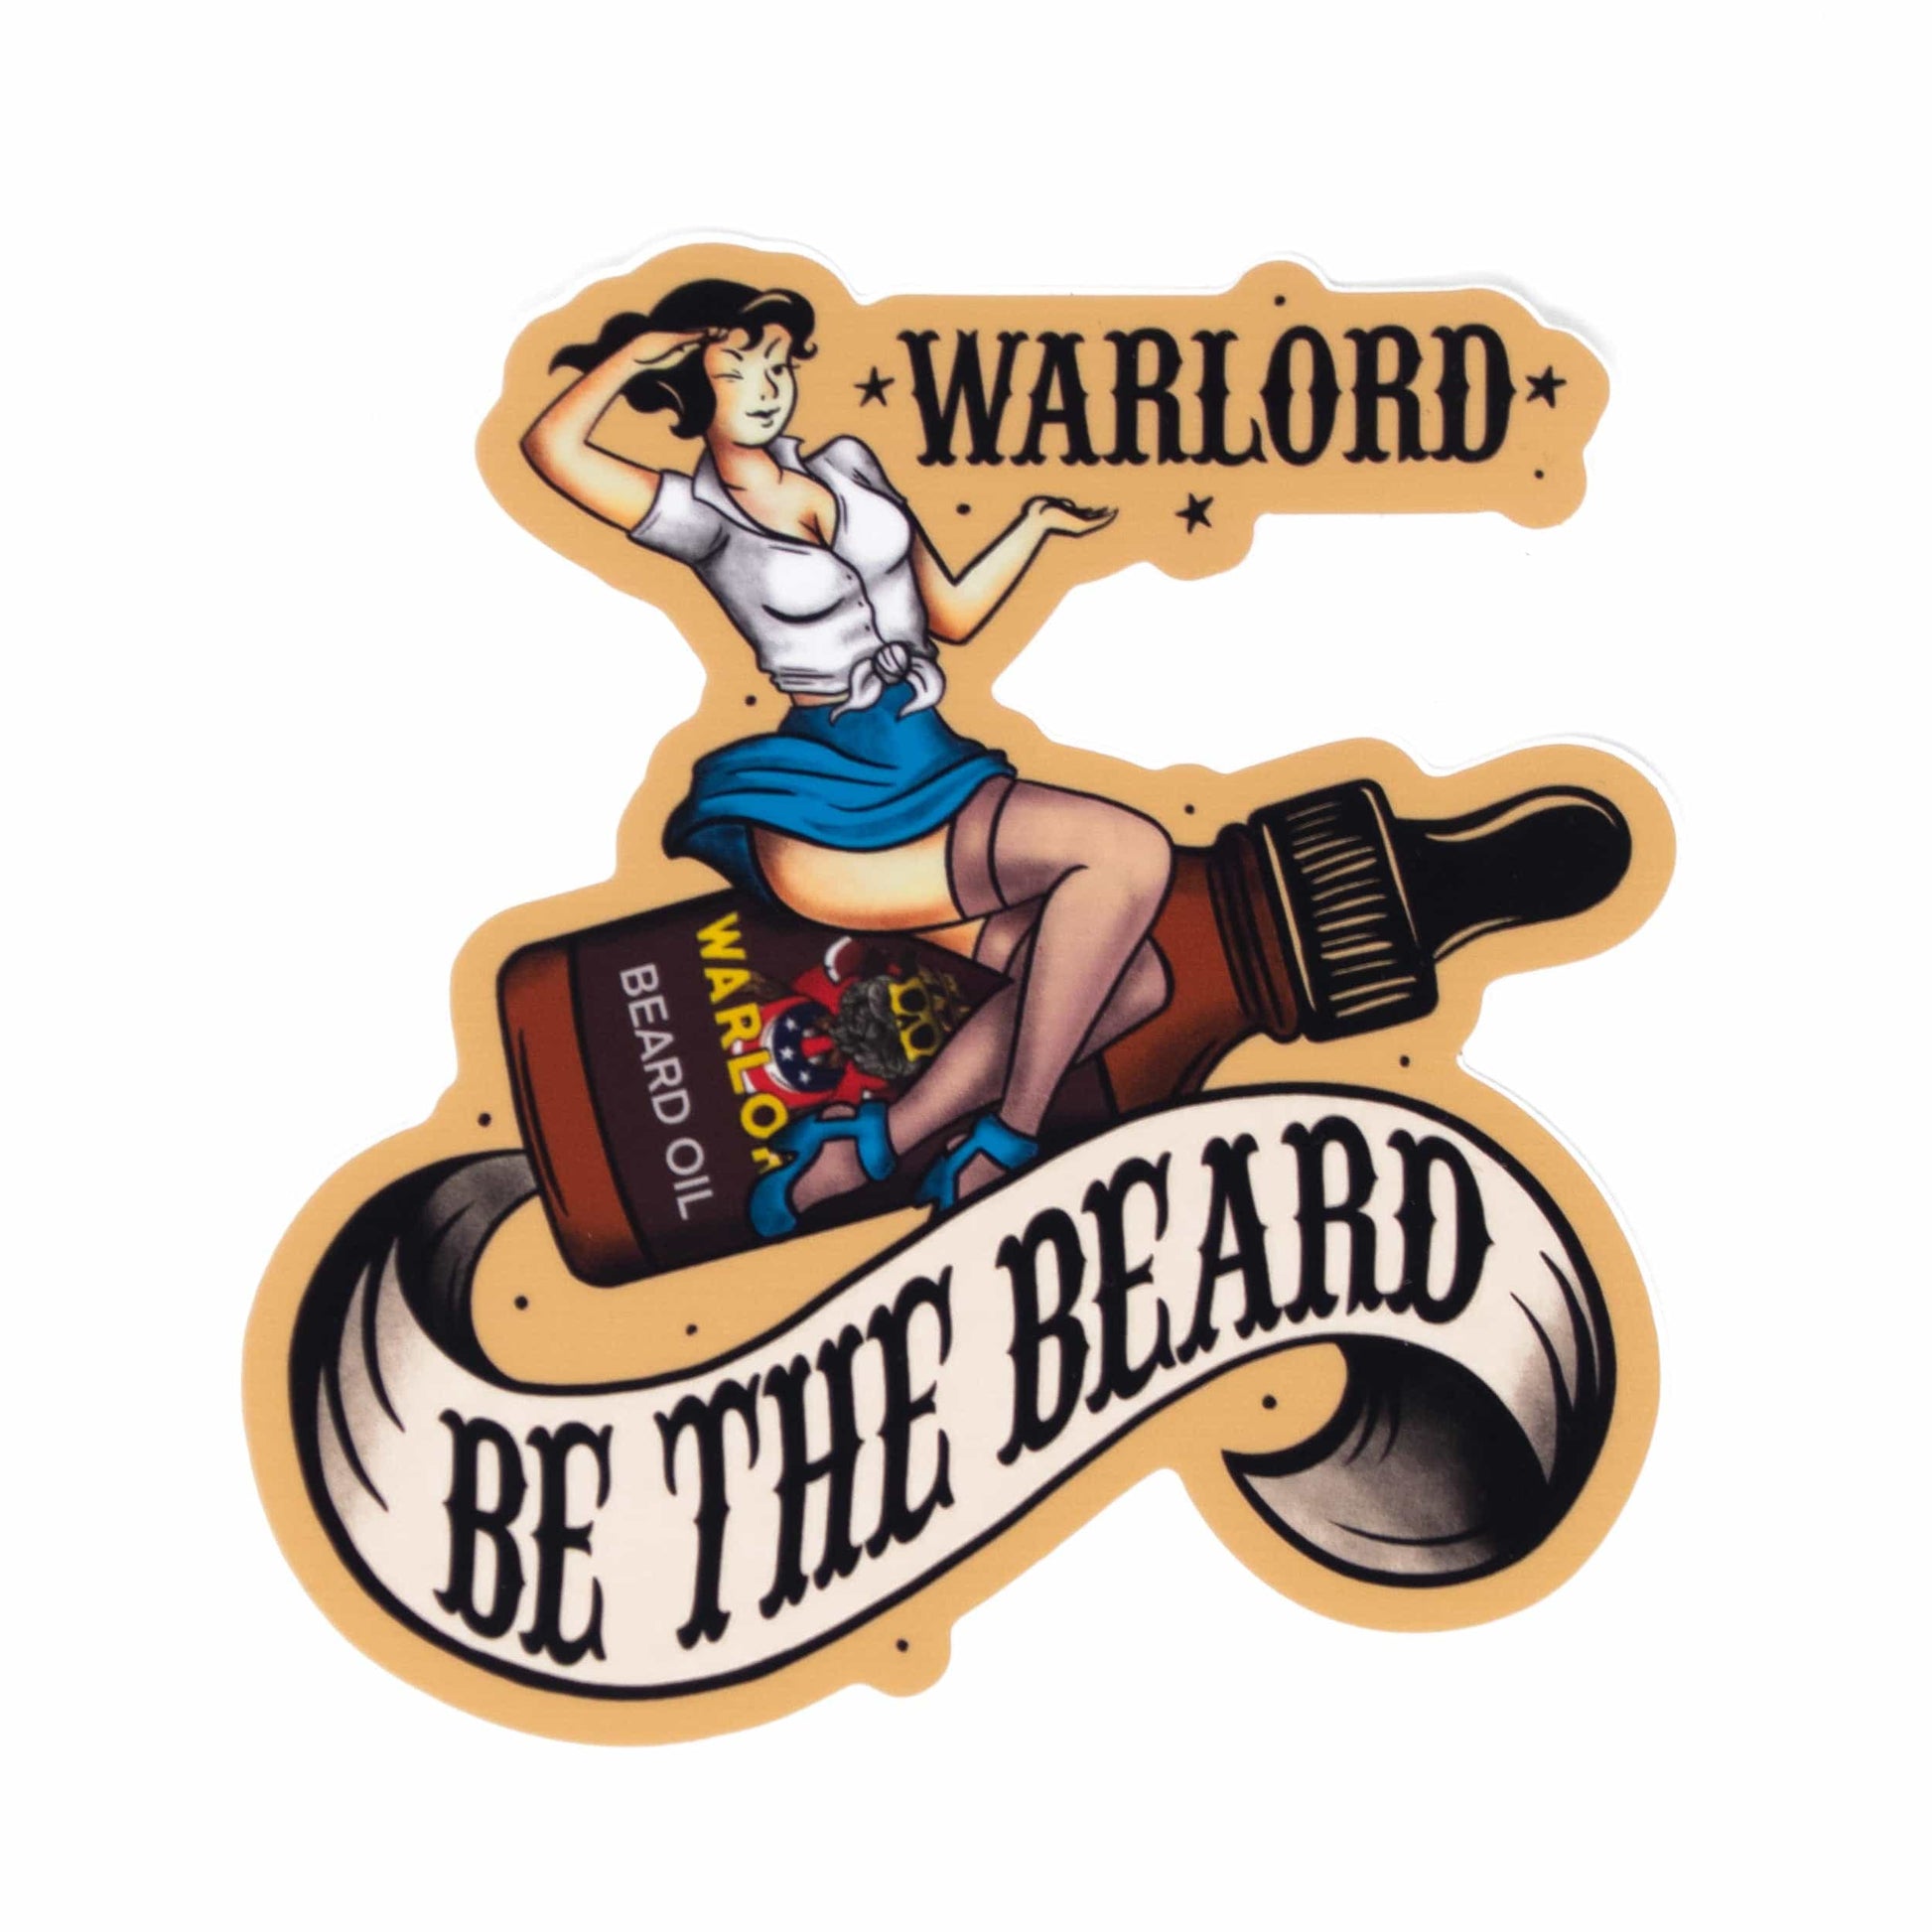 Dorothy Riding The Bottle Decal - Warlord - Men's Grooming Essentials